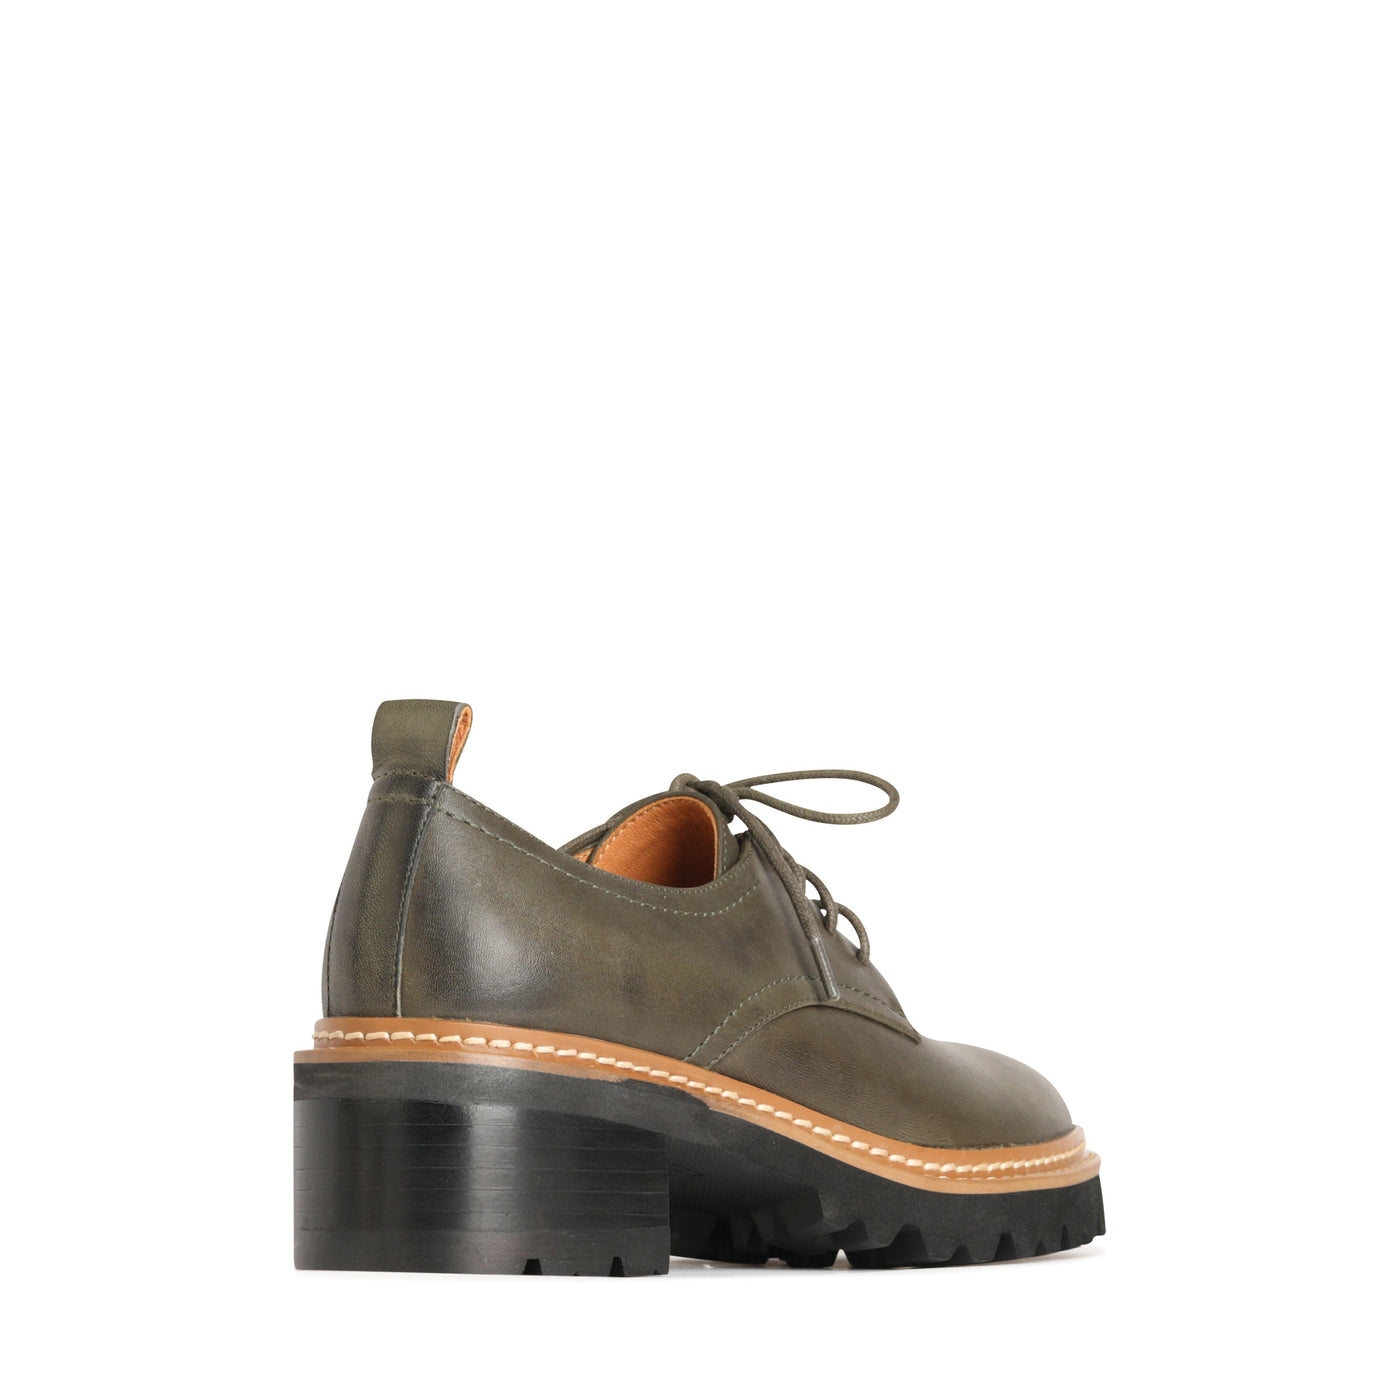 EOS LIND DARK OLIVE - Women Casuals - Collective Shoes 